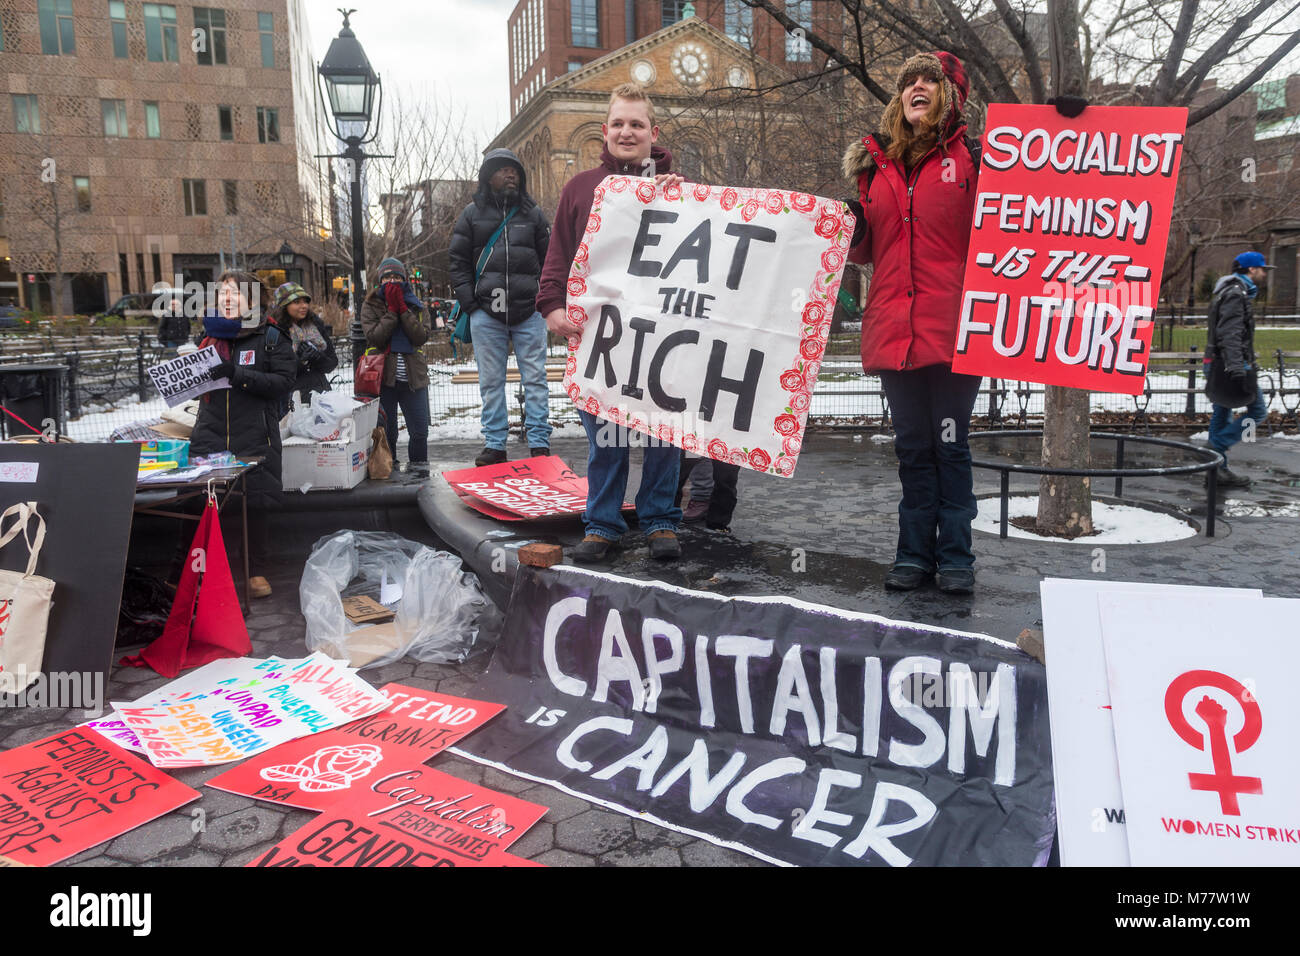 - New York, NY, USA. 8March 2018 Women activists rallied in Washington Square Park for a march to Zuccotti Park, to mark International Women's Day ©Stacy Walsh Rosenstock Credit: Stacy Walsh Rosenstock/Alamy Live News Stock Photo